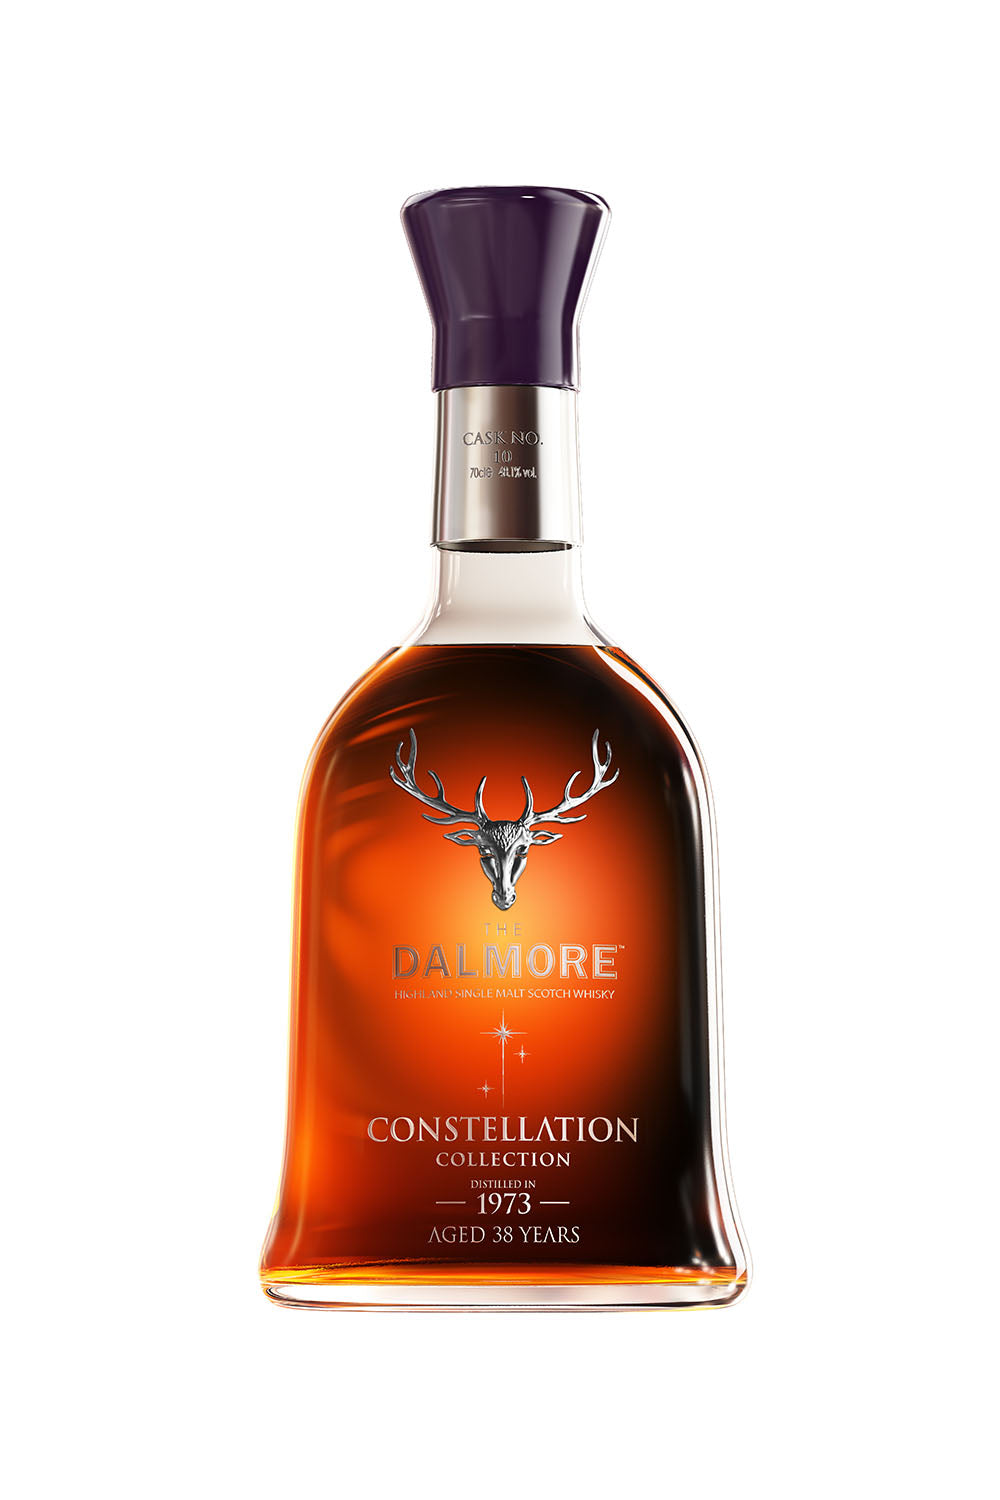 The Dalmore 1973 Constellation - Cask 10